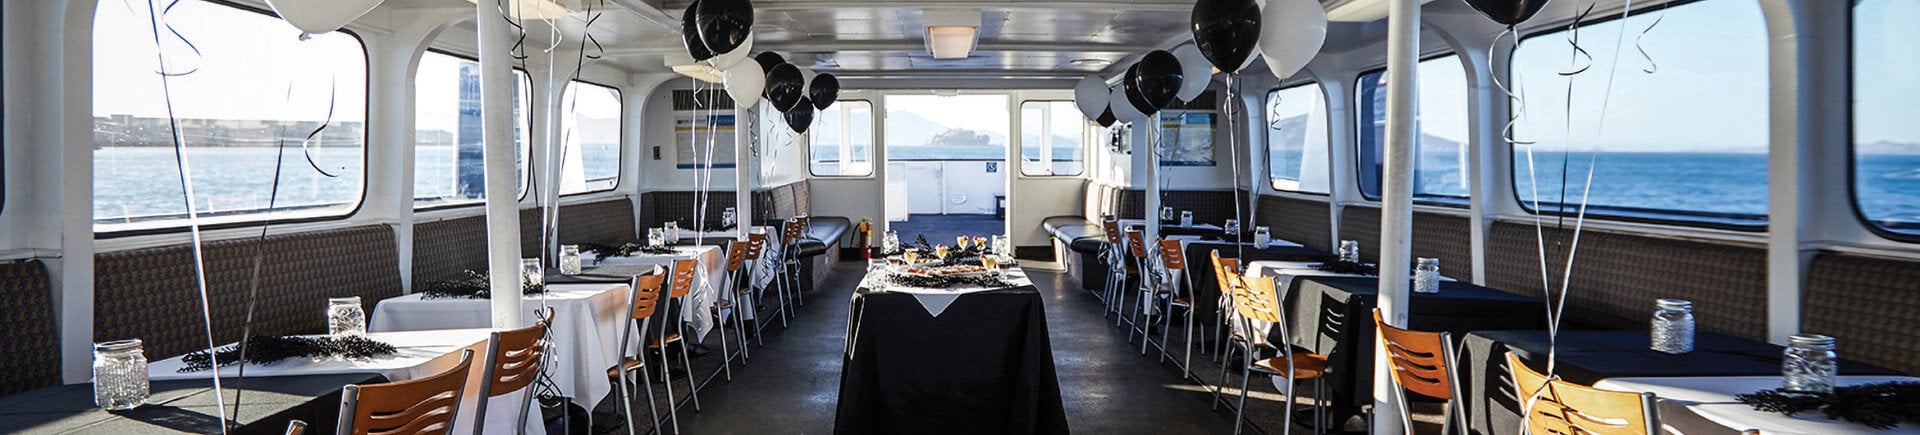 Interior of a ship set up for an event